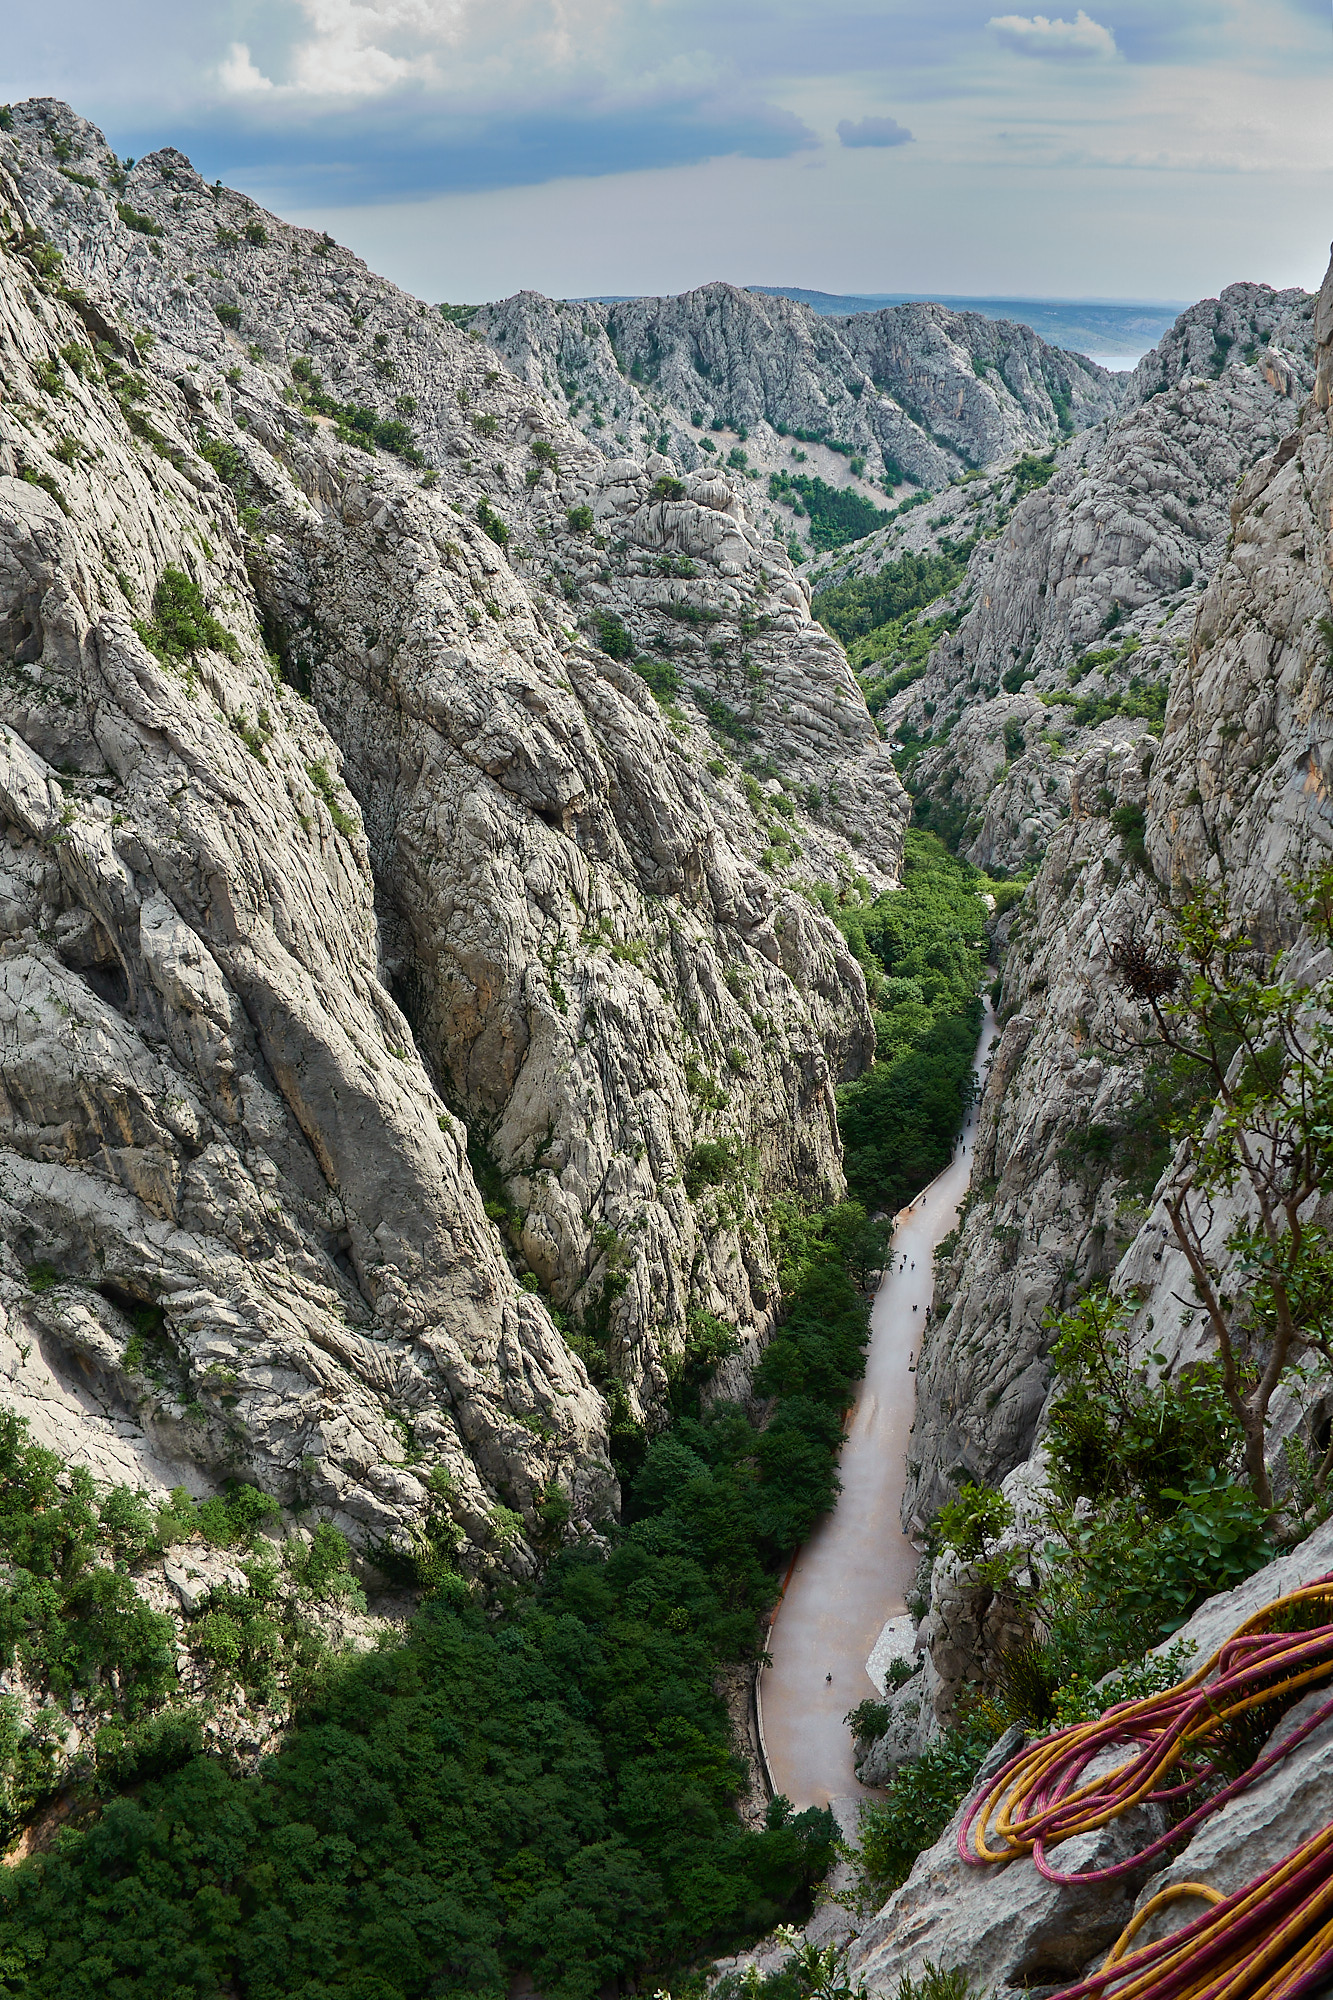 A view of some large limestone cliffs with trees below and blue sky above in the Paklenica gorge in Croatia